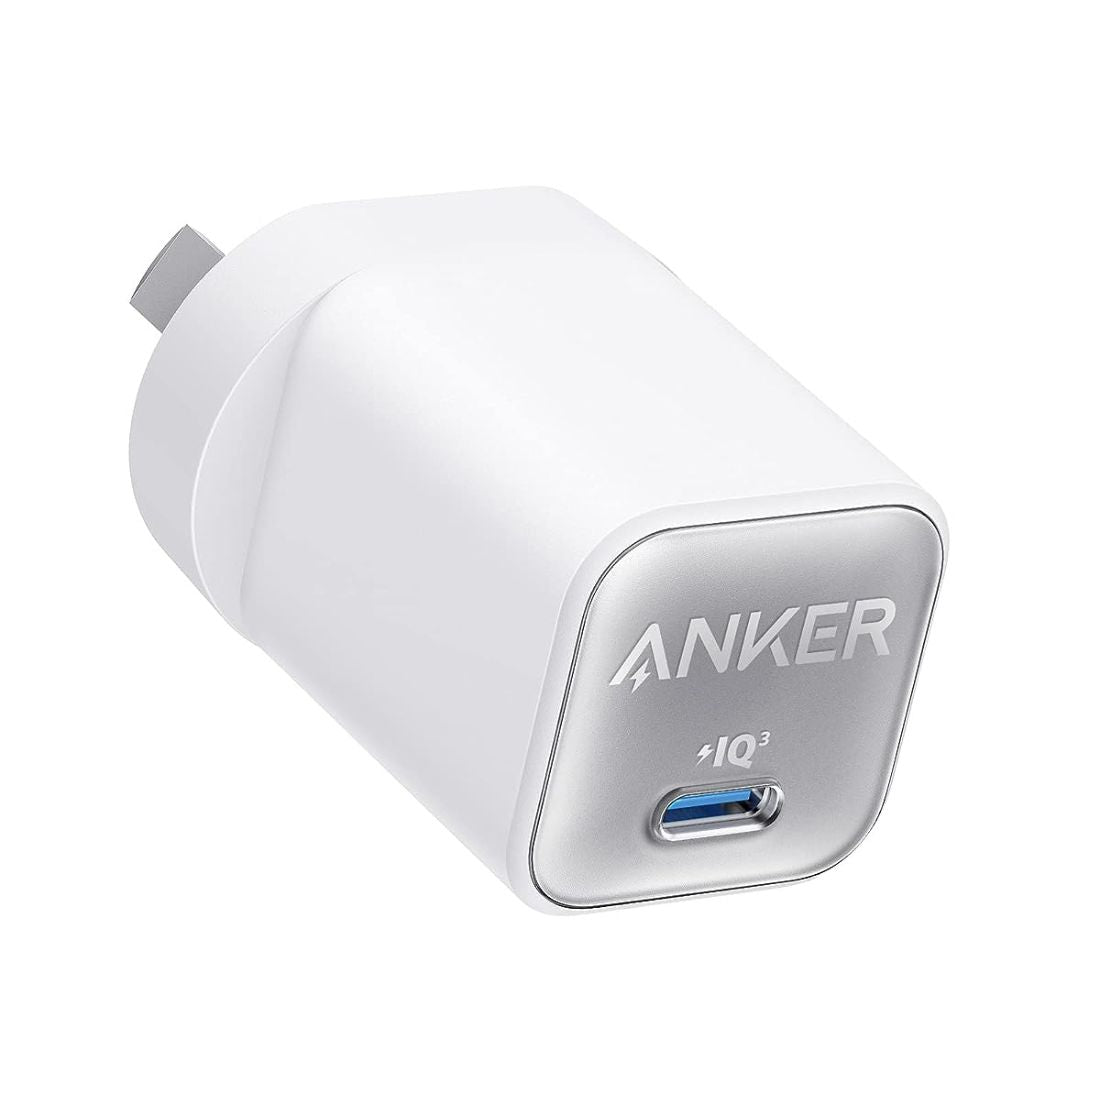 Anker 511 Charger white